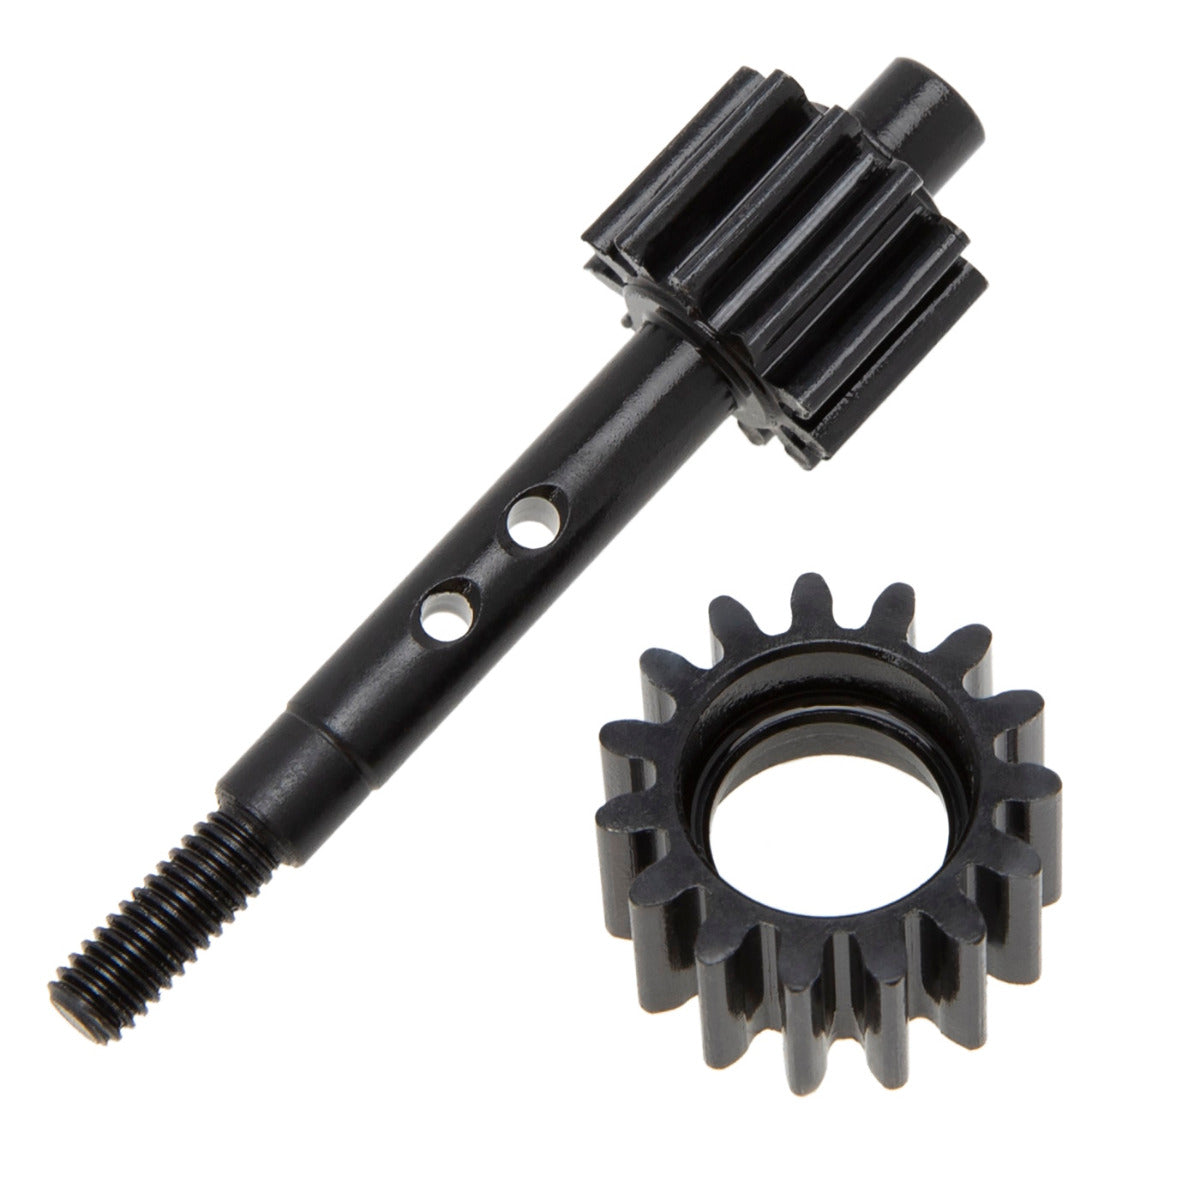 Transmission Gear for 272R Gearbox (gear set reduction ratio 2.73:1) FOR Traxxas Slash 2WD - PowerHobby